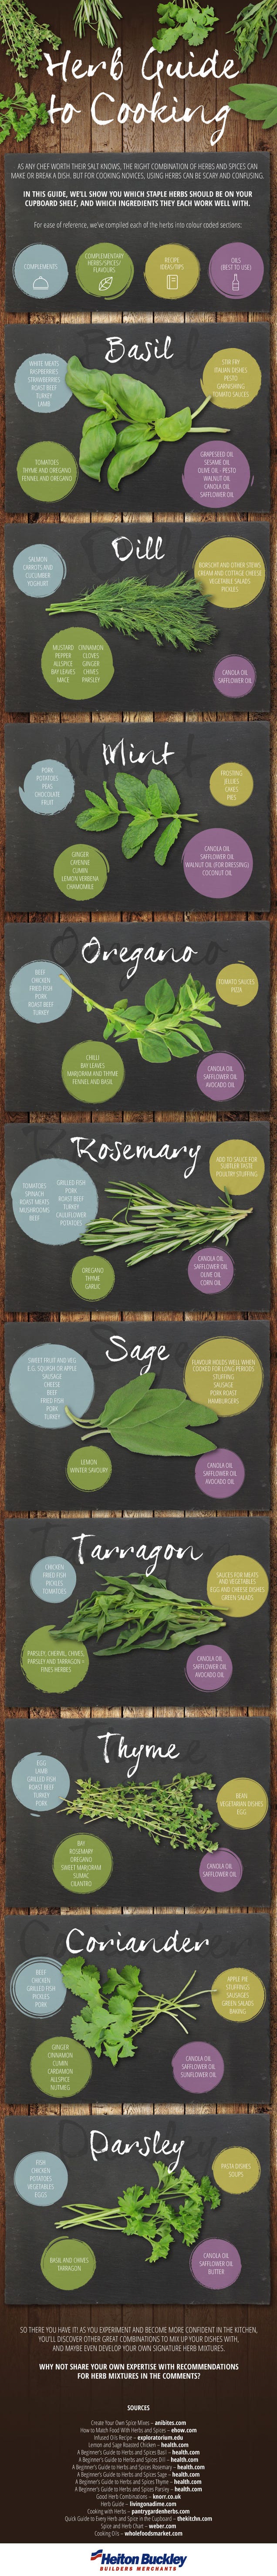 This Infographic Tells you How to Best Use Herbs in Your Cooking